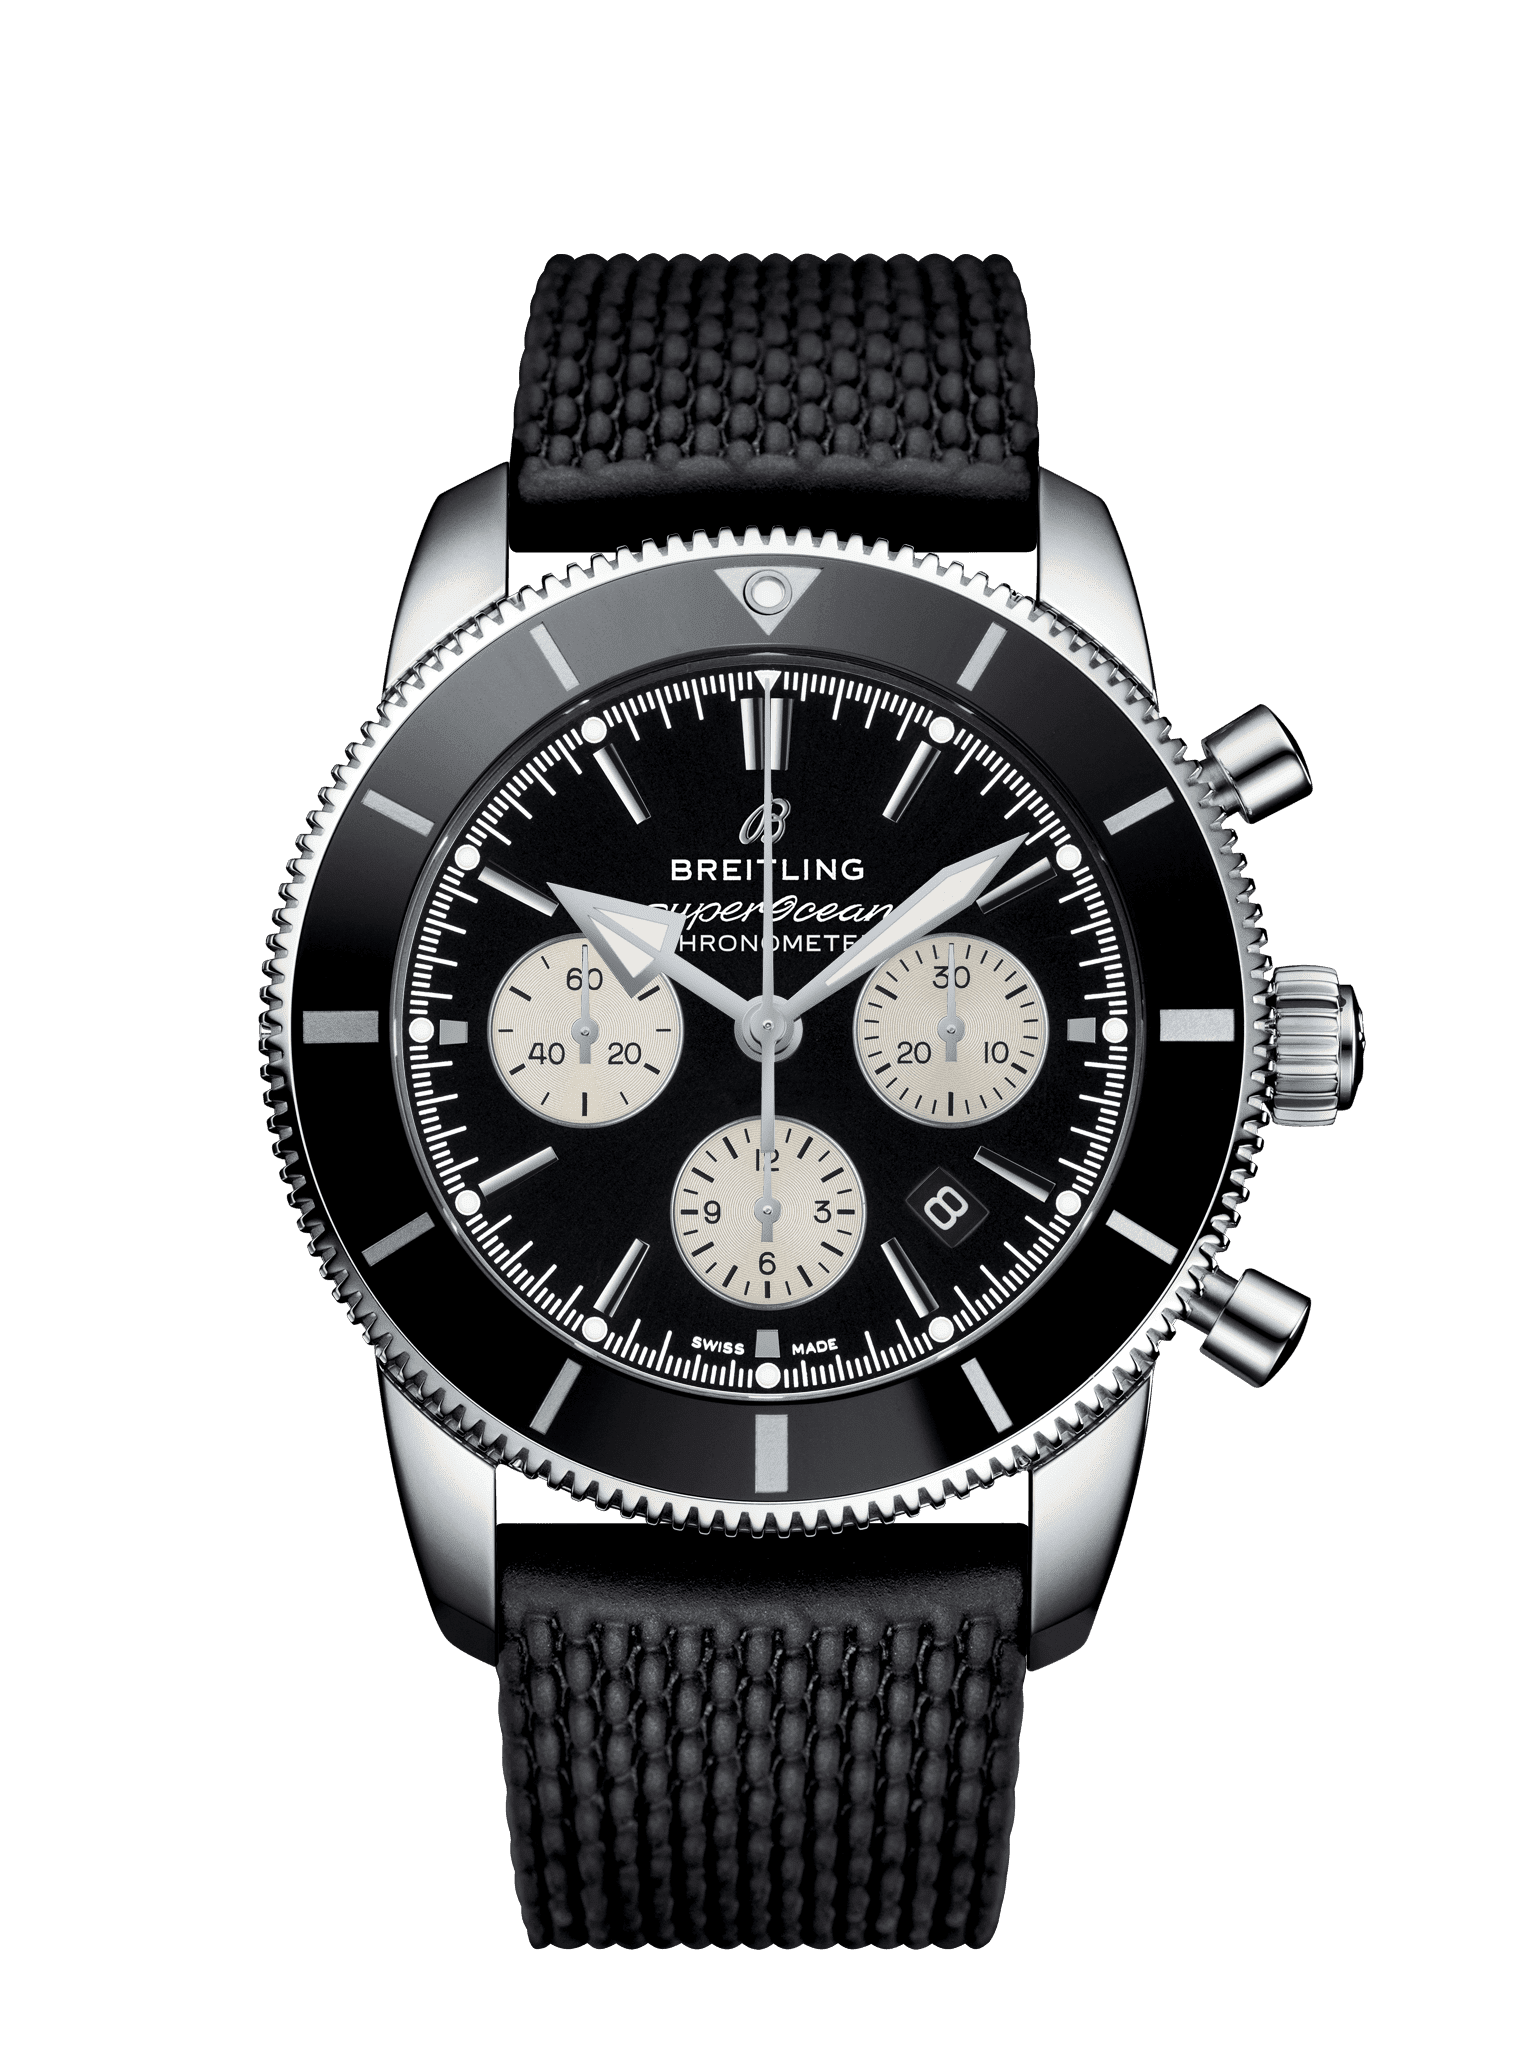 Image result for Breitling Superocean Heritage II B01 Chronograph 44